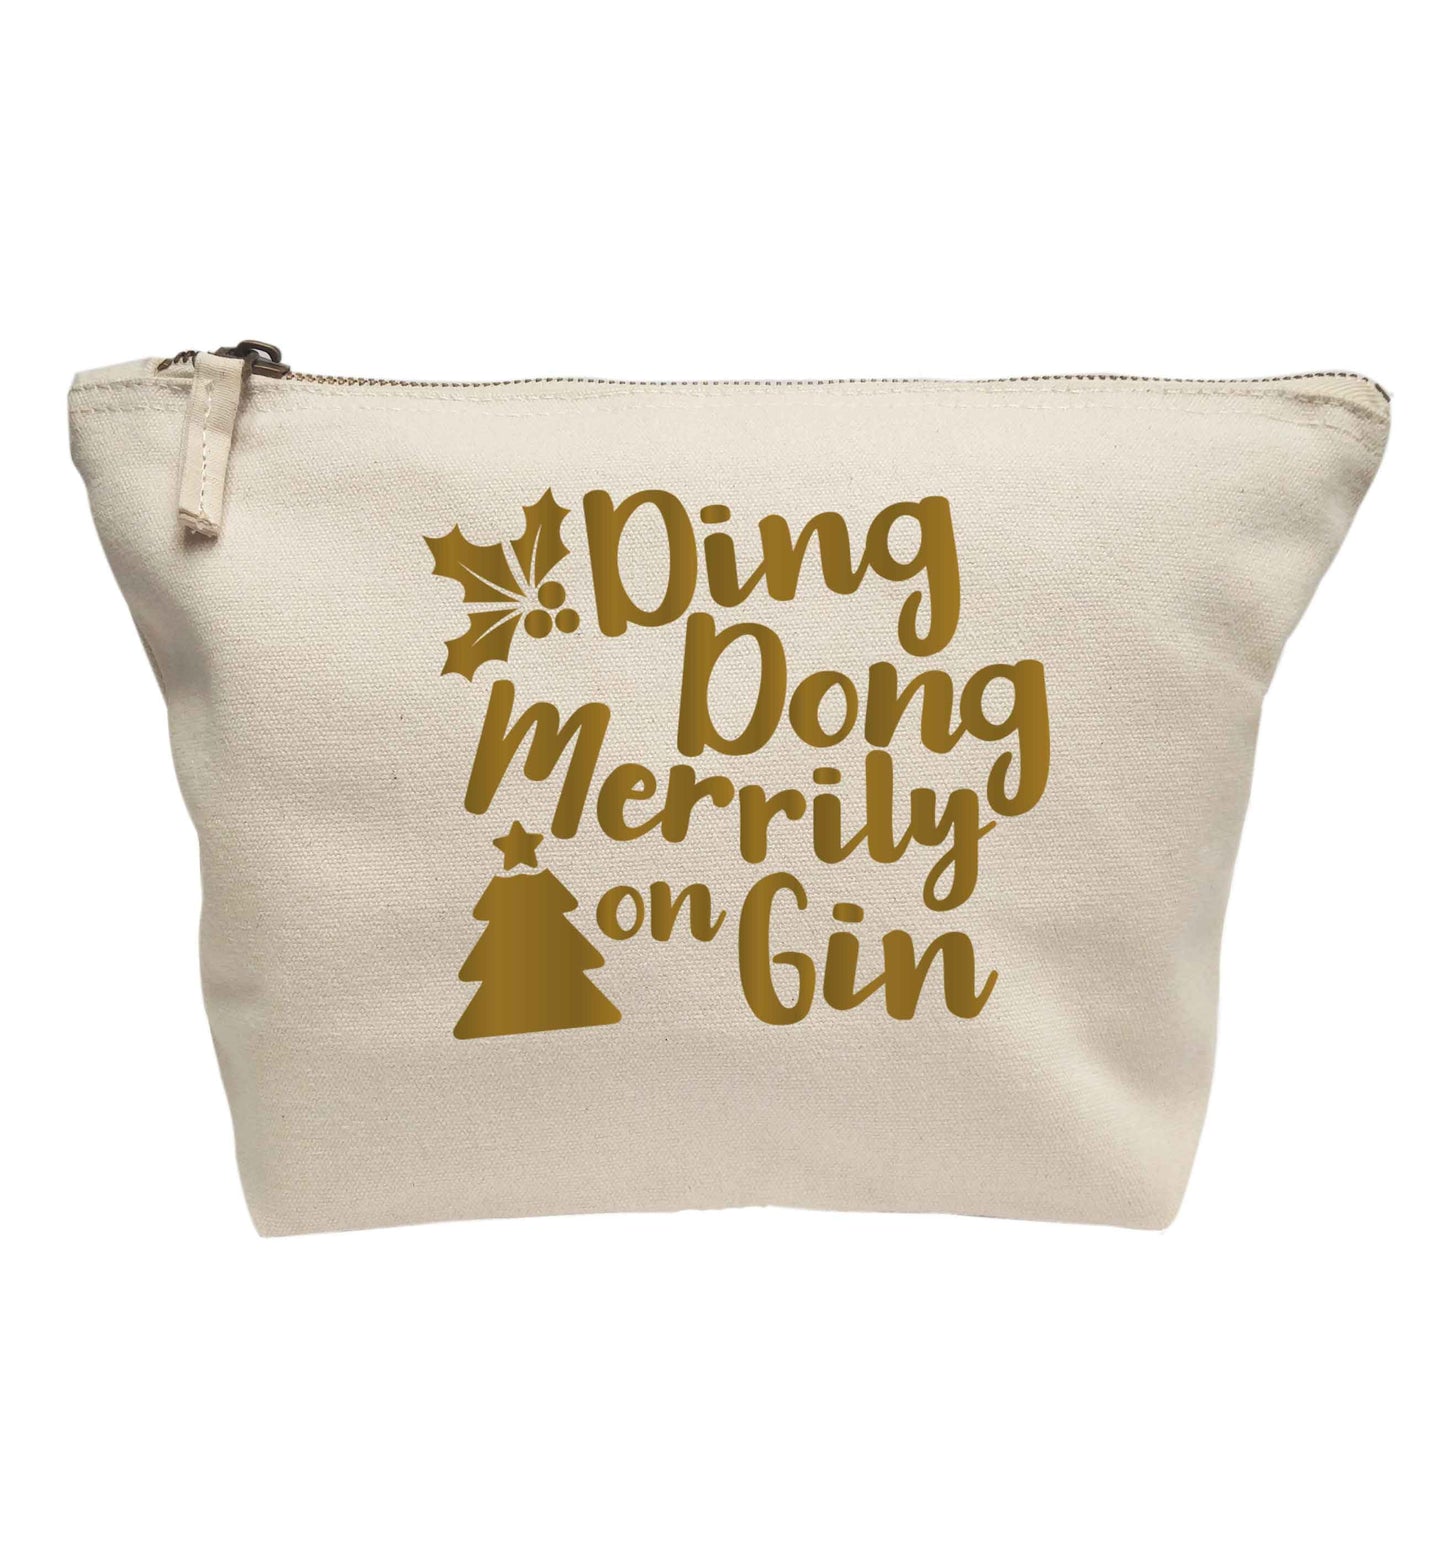 Ding dong merrily on gin | makeup / wash bag